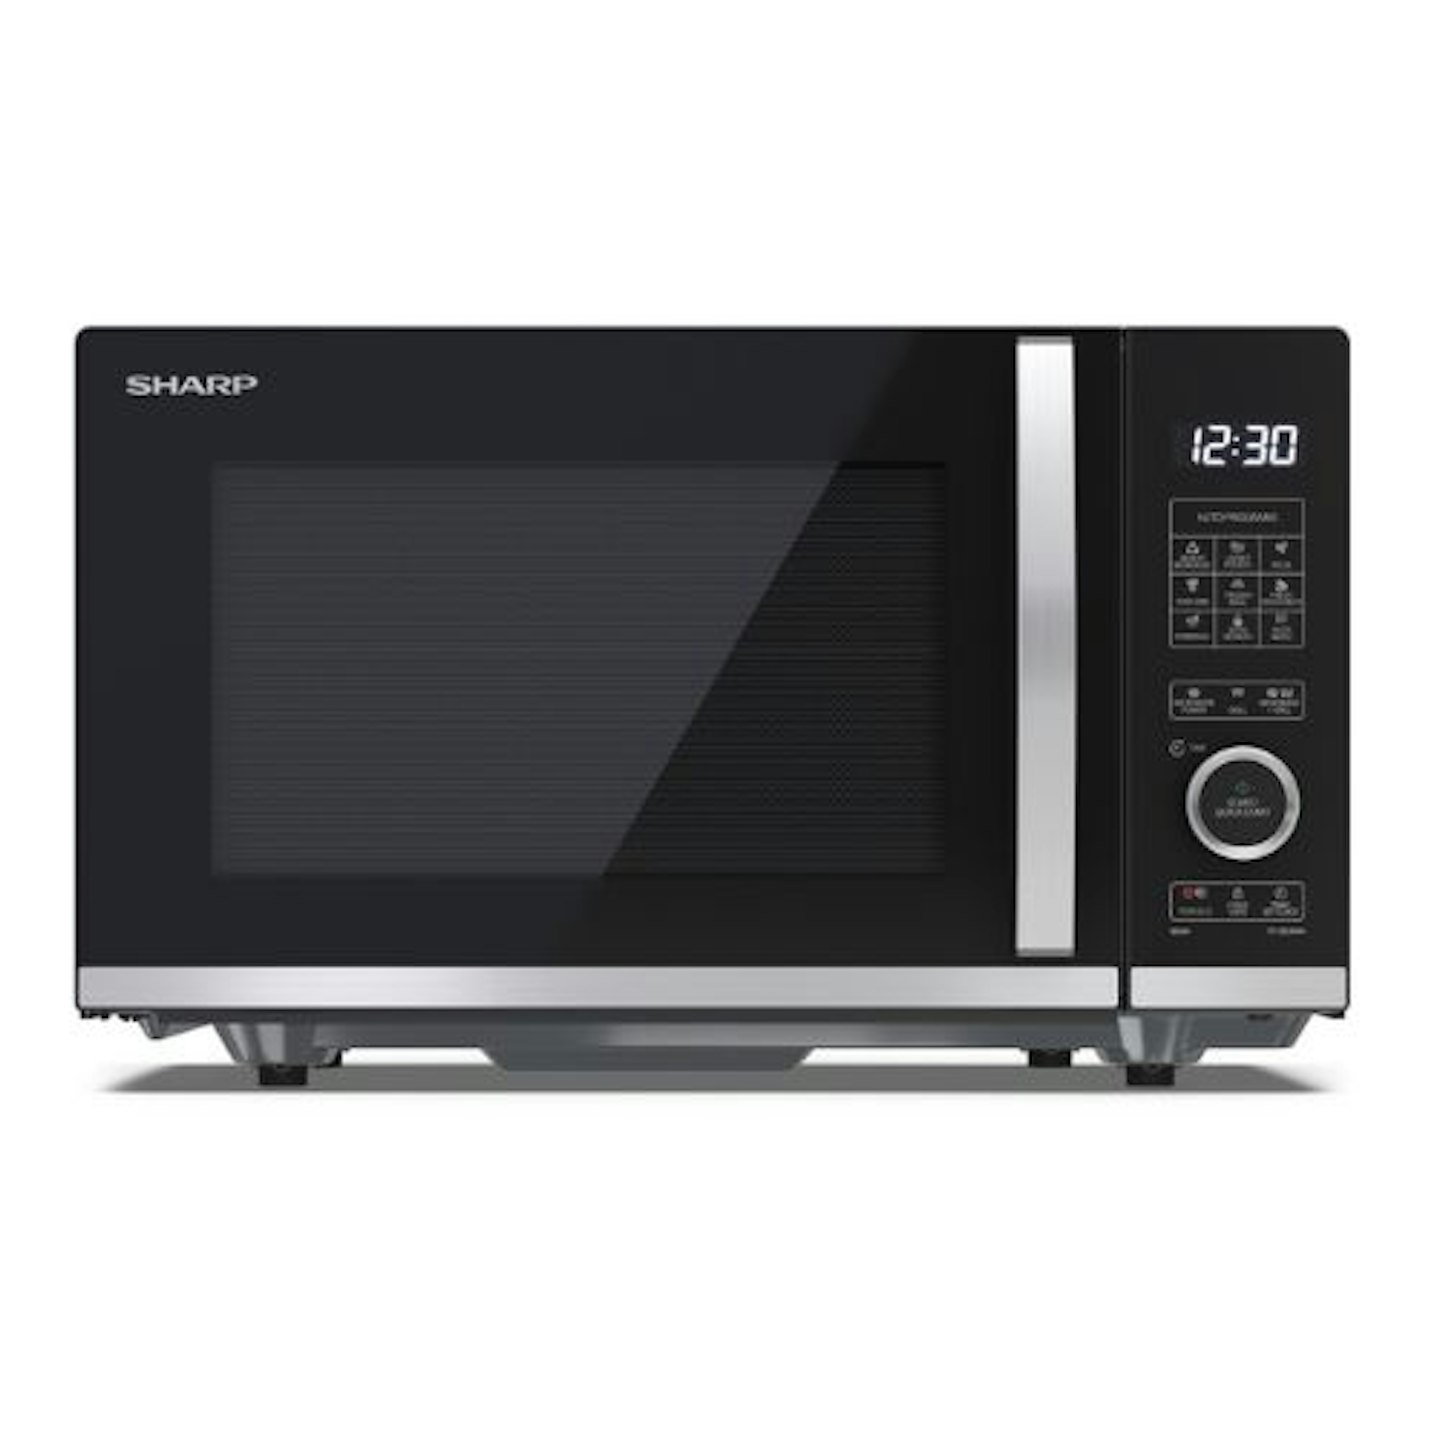 Sharp 20L Digital Flatbed Microwave with Grill - Black